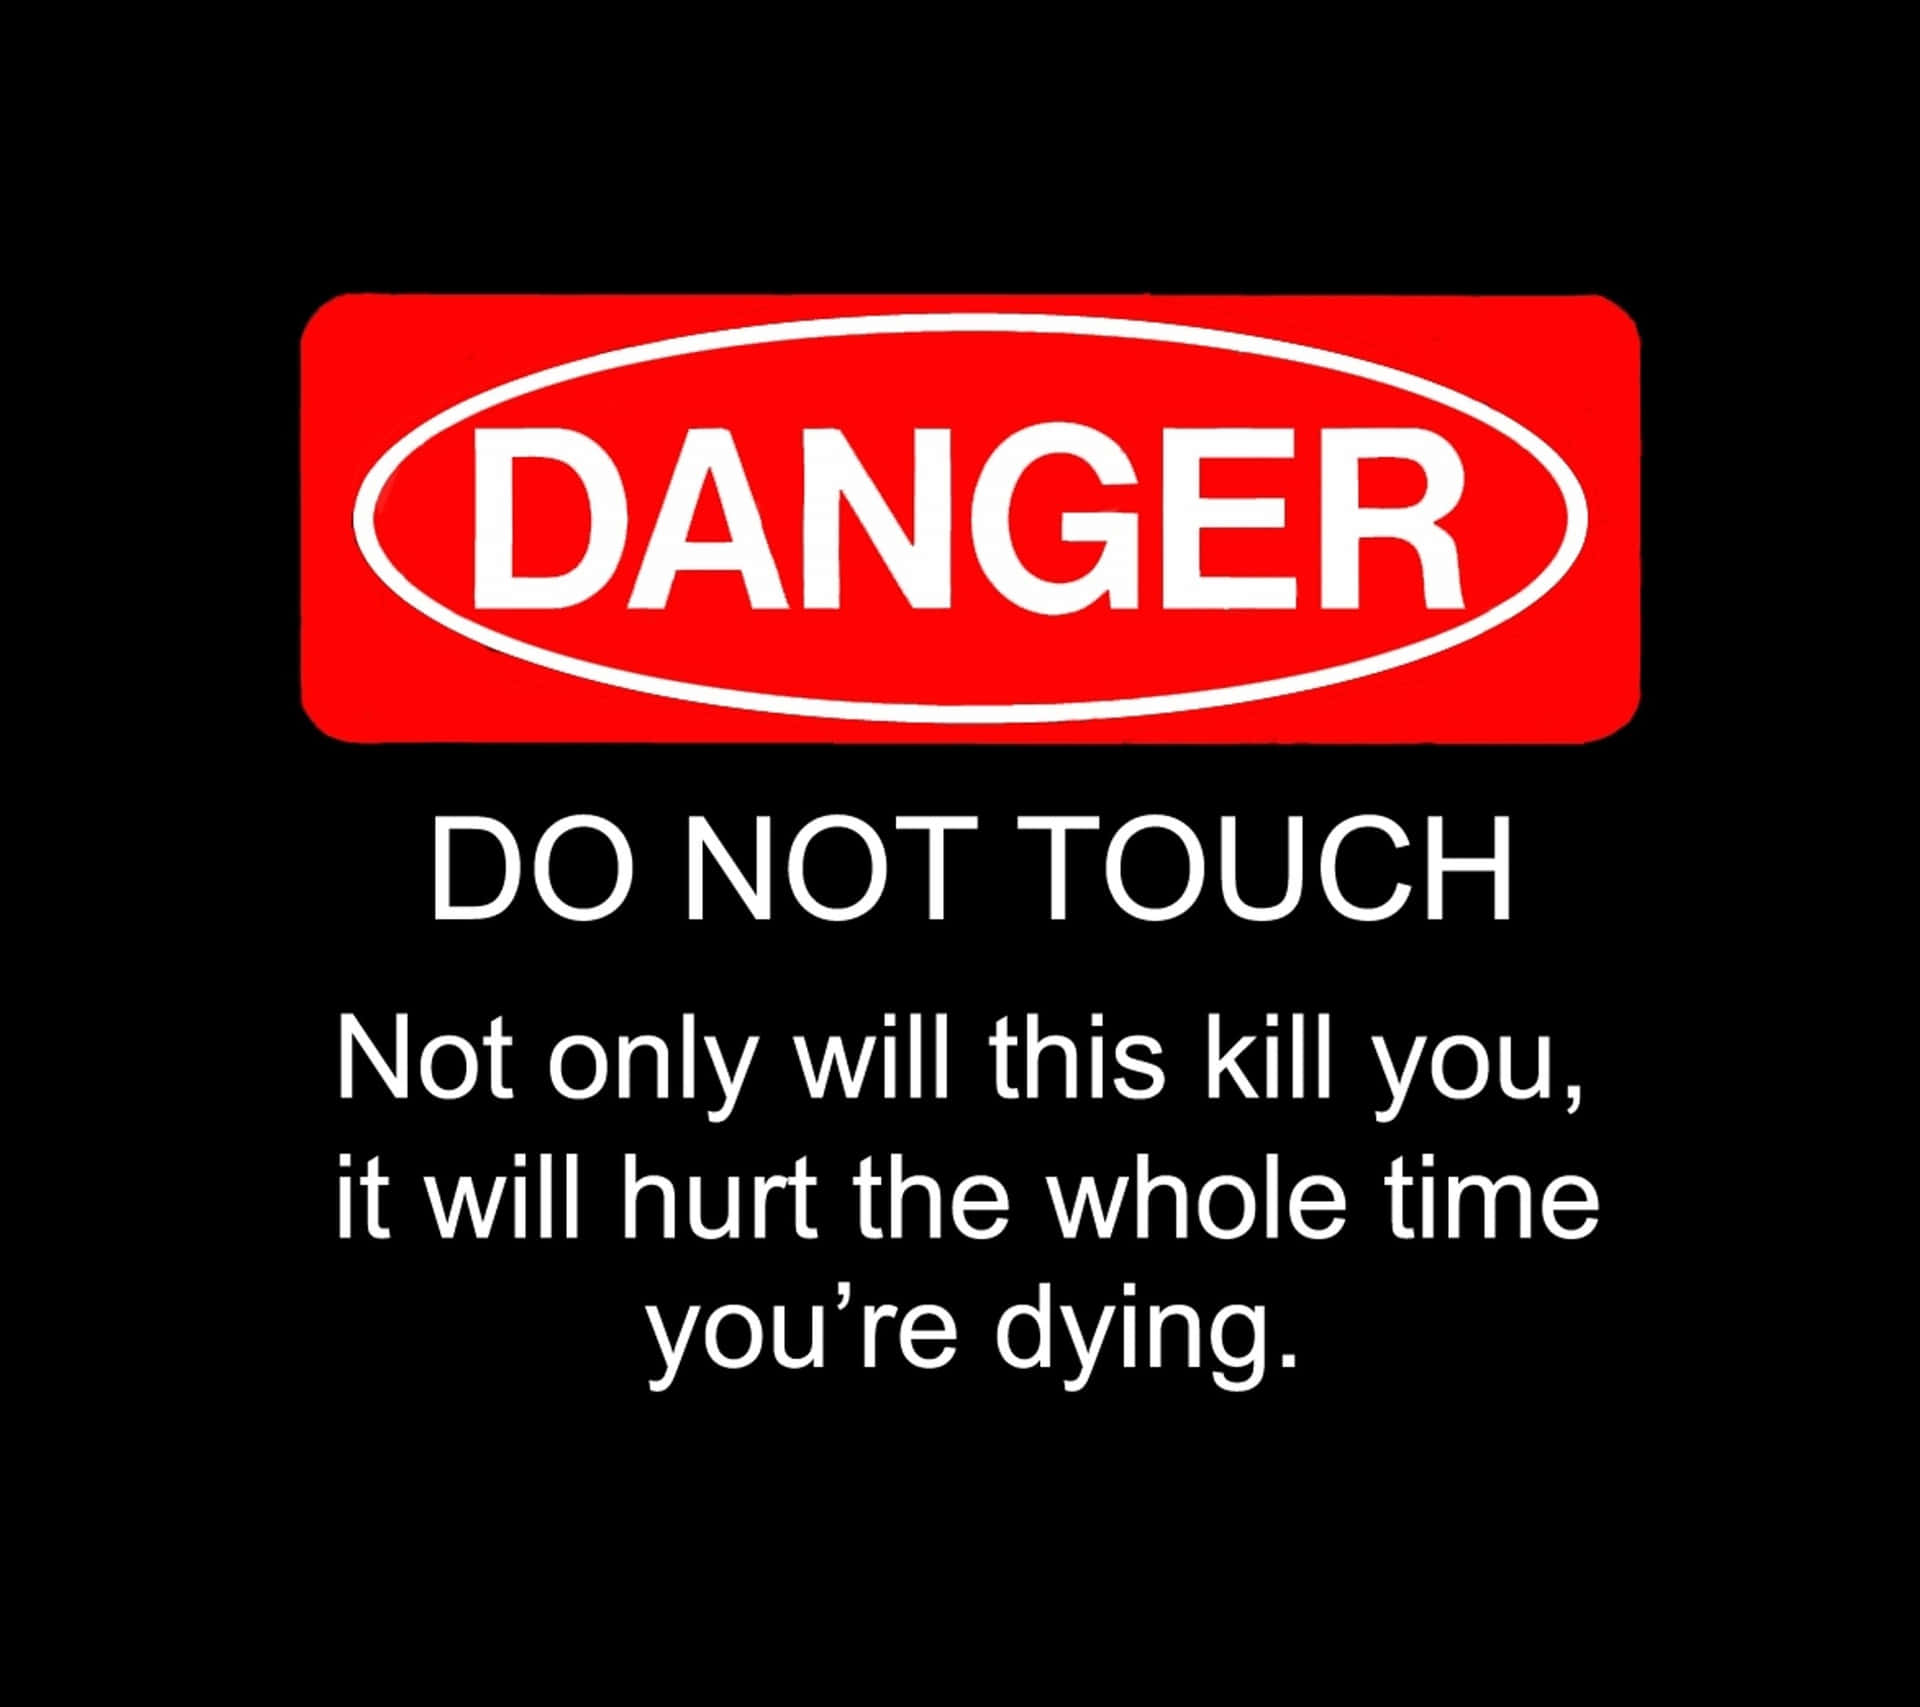 Danger Do Not Touch Only This Will Kill You Hurt The Whole You're Dying Wallpaper